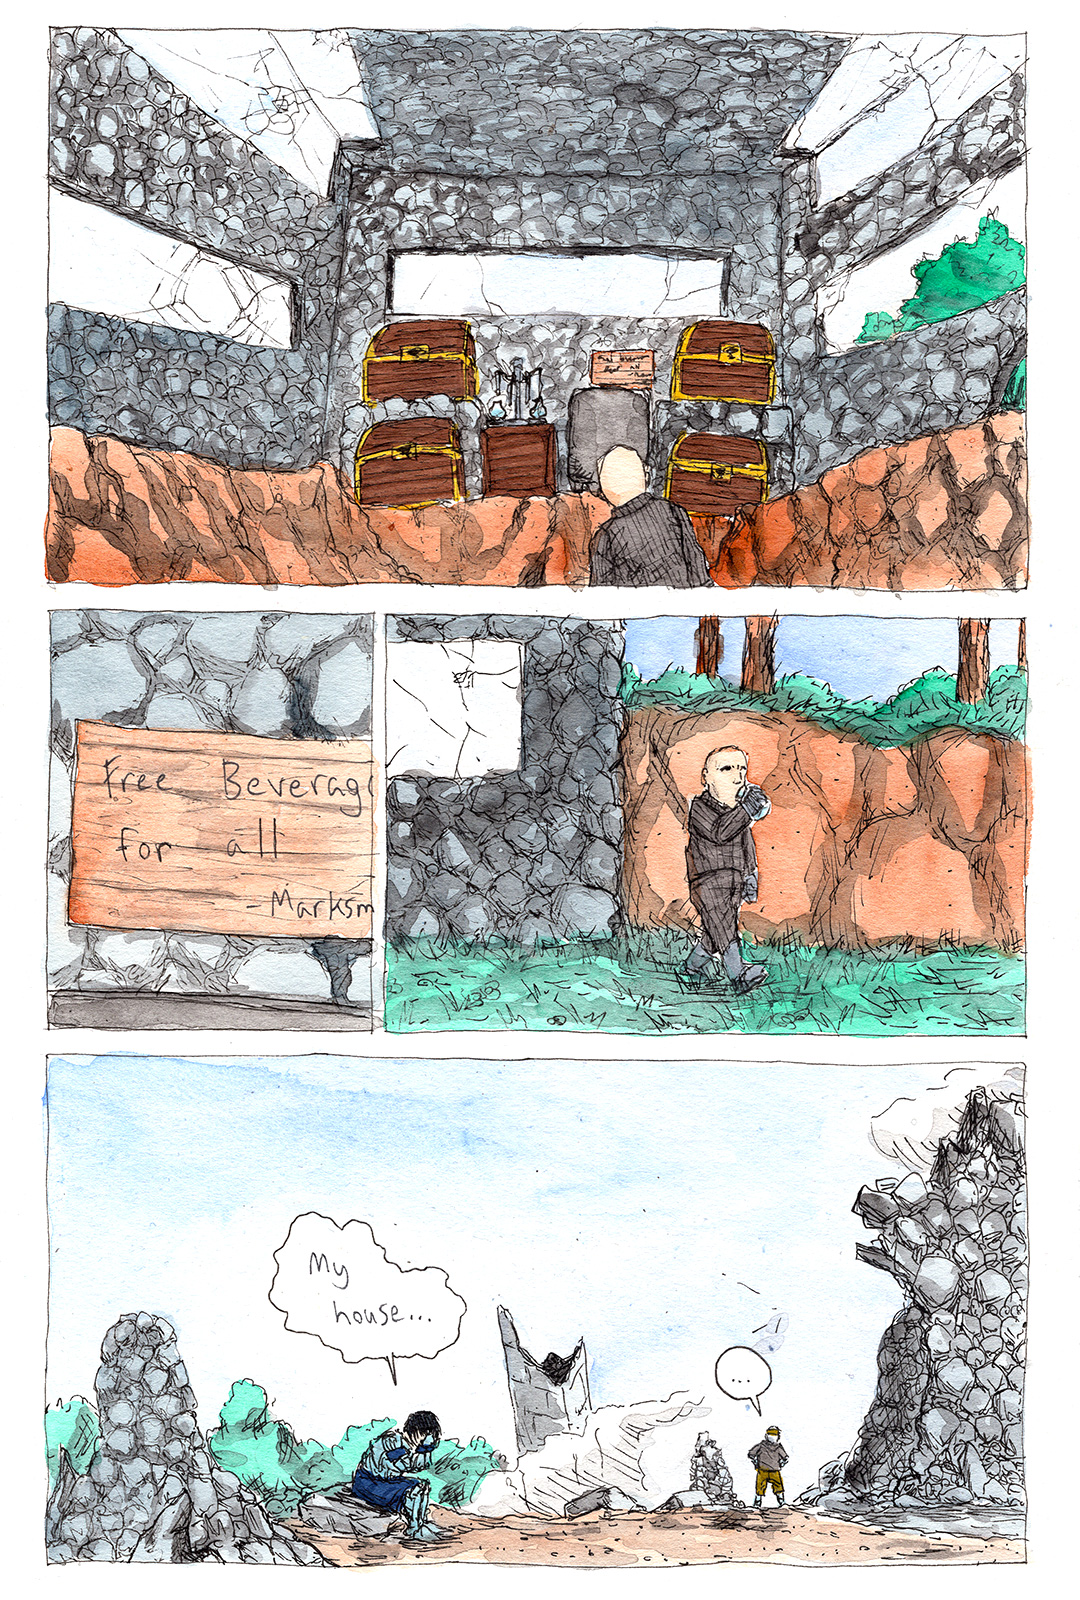 2B2T chapter 8 pg155